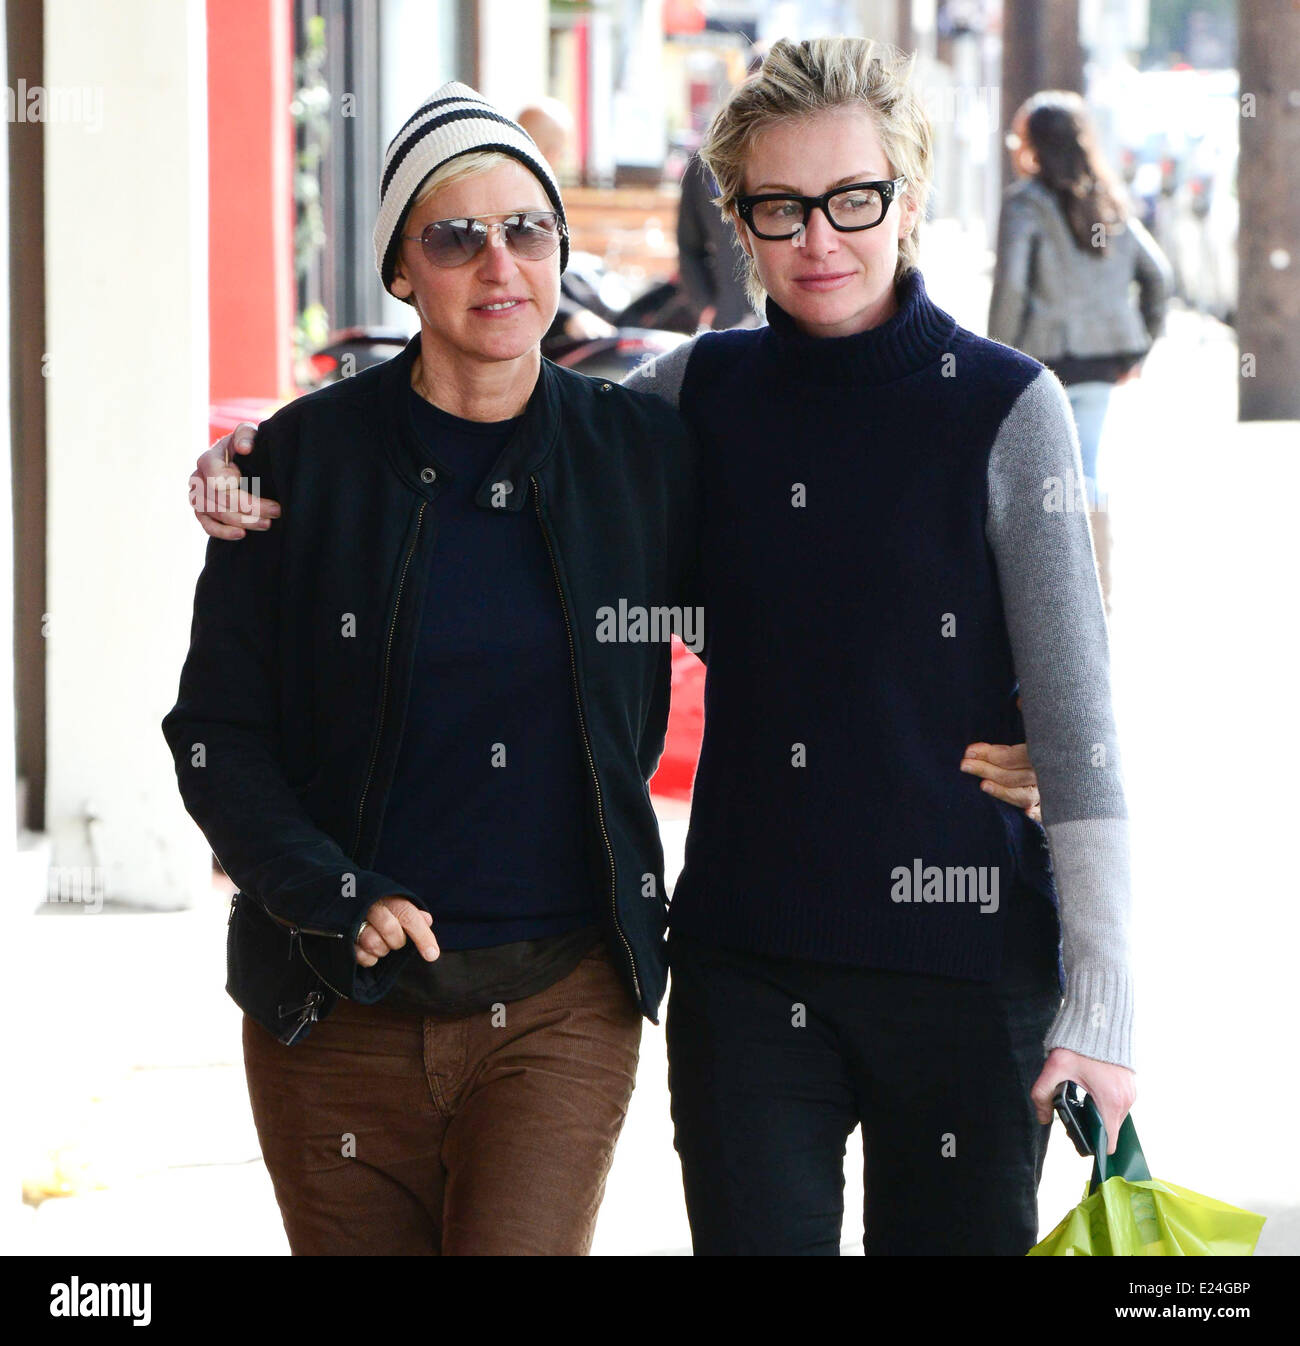 Portia De Rossi High Resolution Stock Photography and Images - Alamy